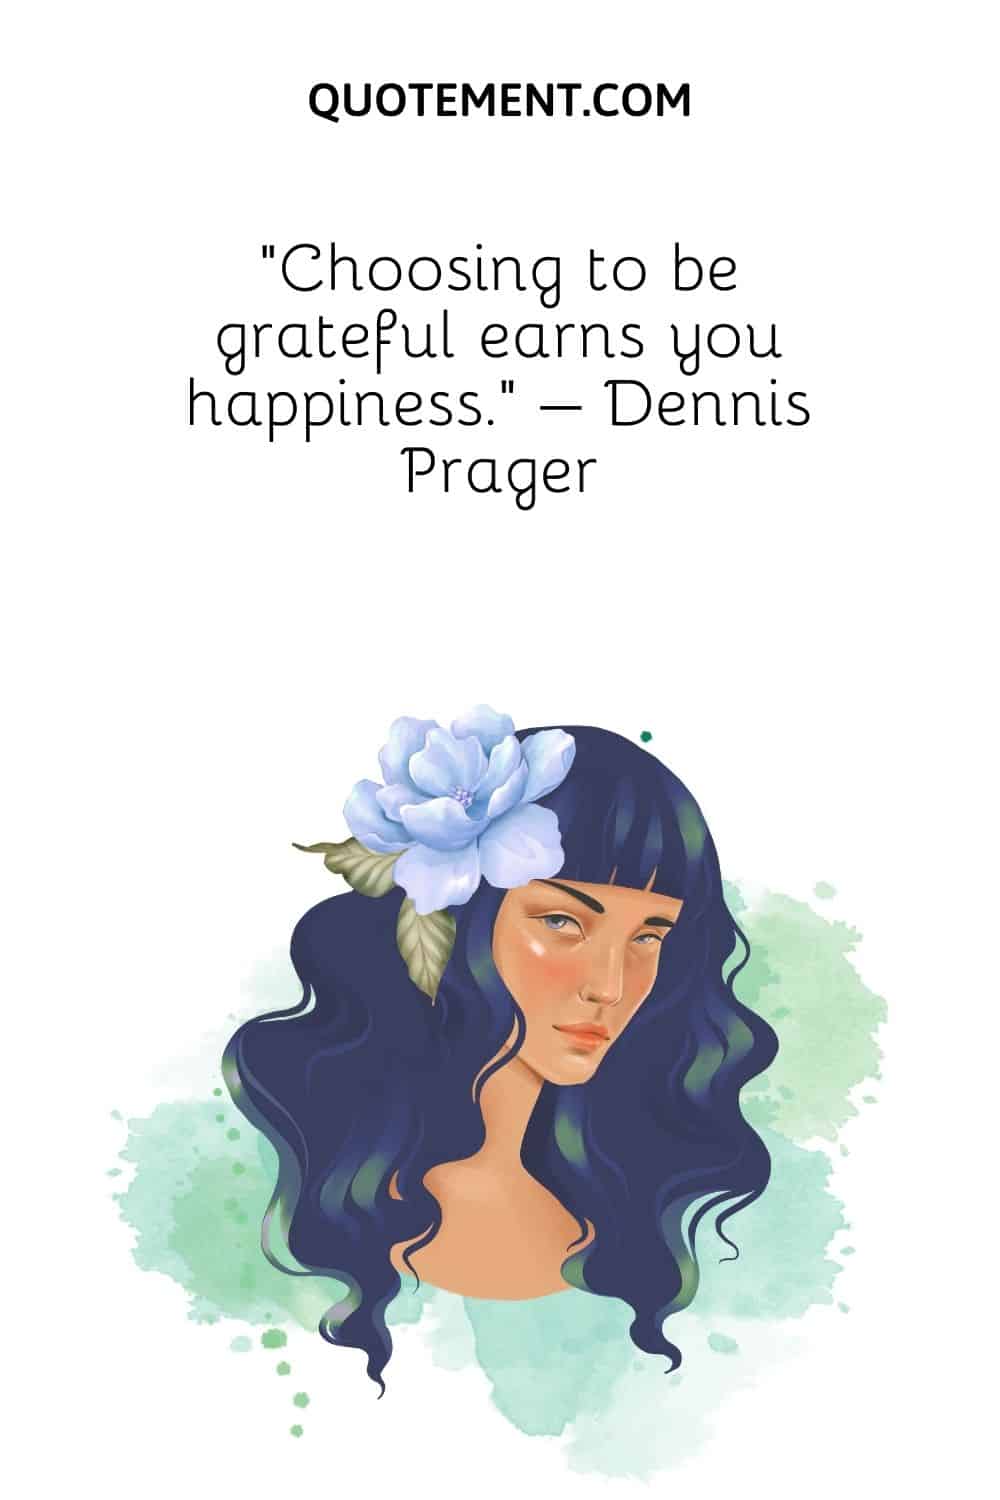 Choosing to be grateful earns you happiness. – Dennis Prager